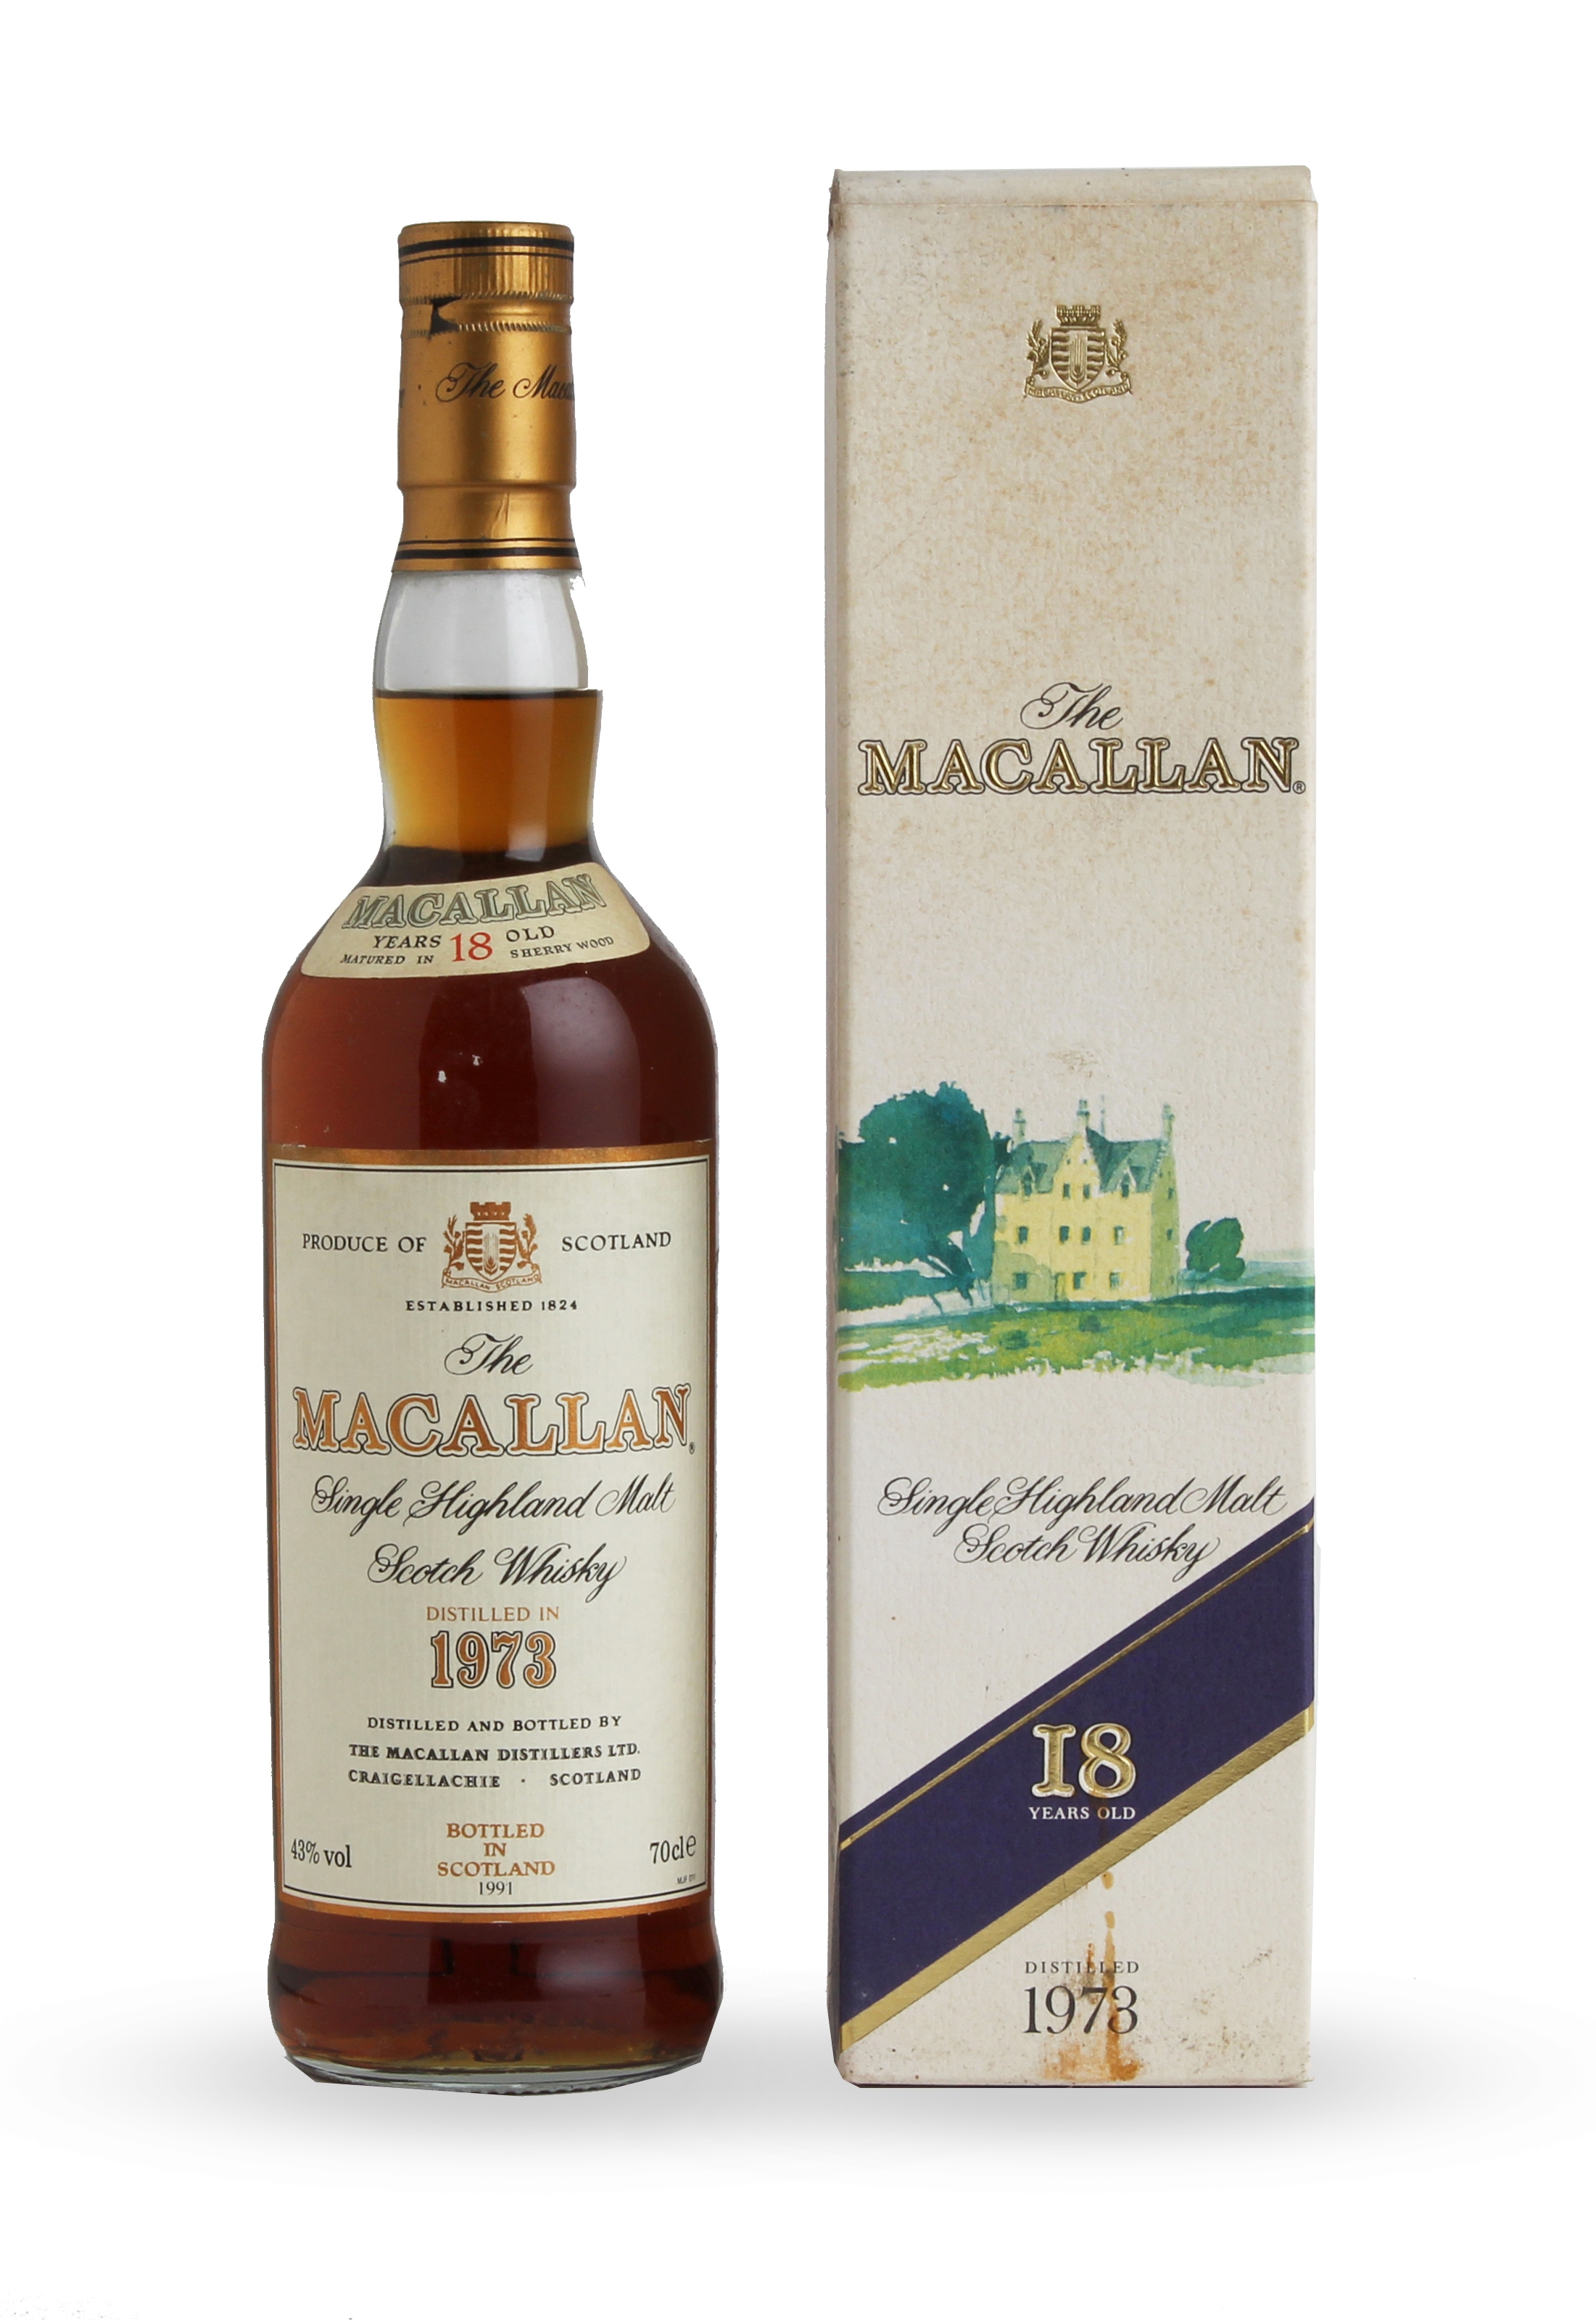 The Macallan-18 year old-1973